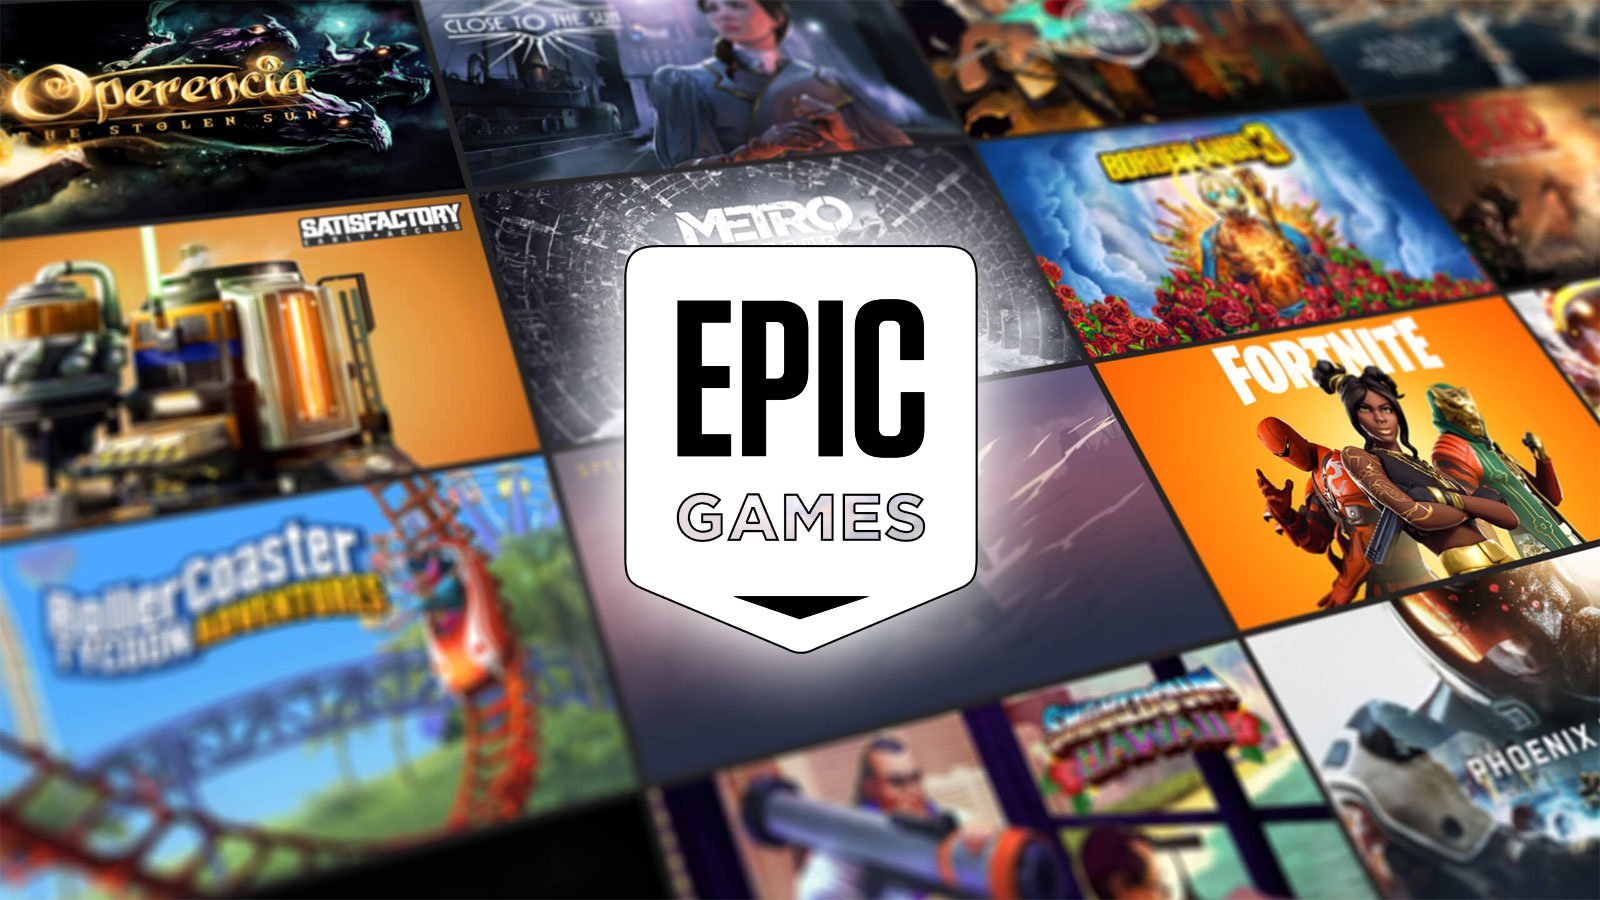 Epic Games, Creator of Fortnite, to Pay $520 Million Over